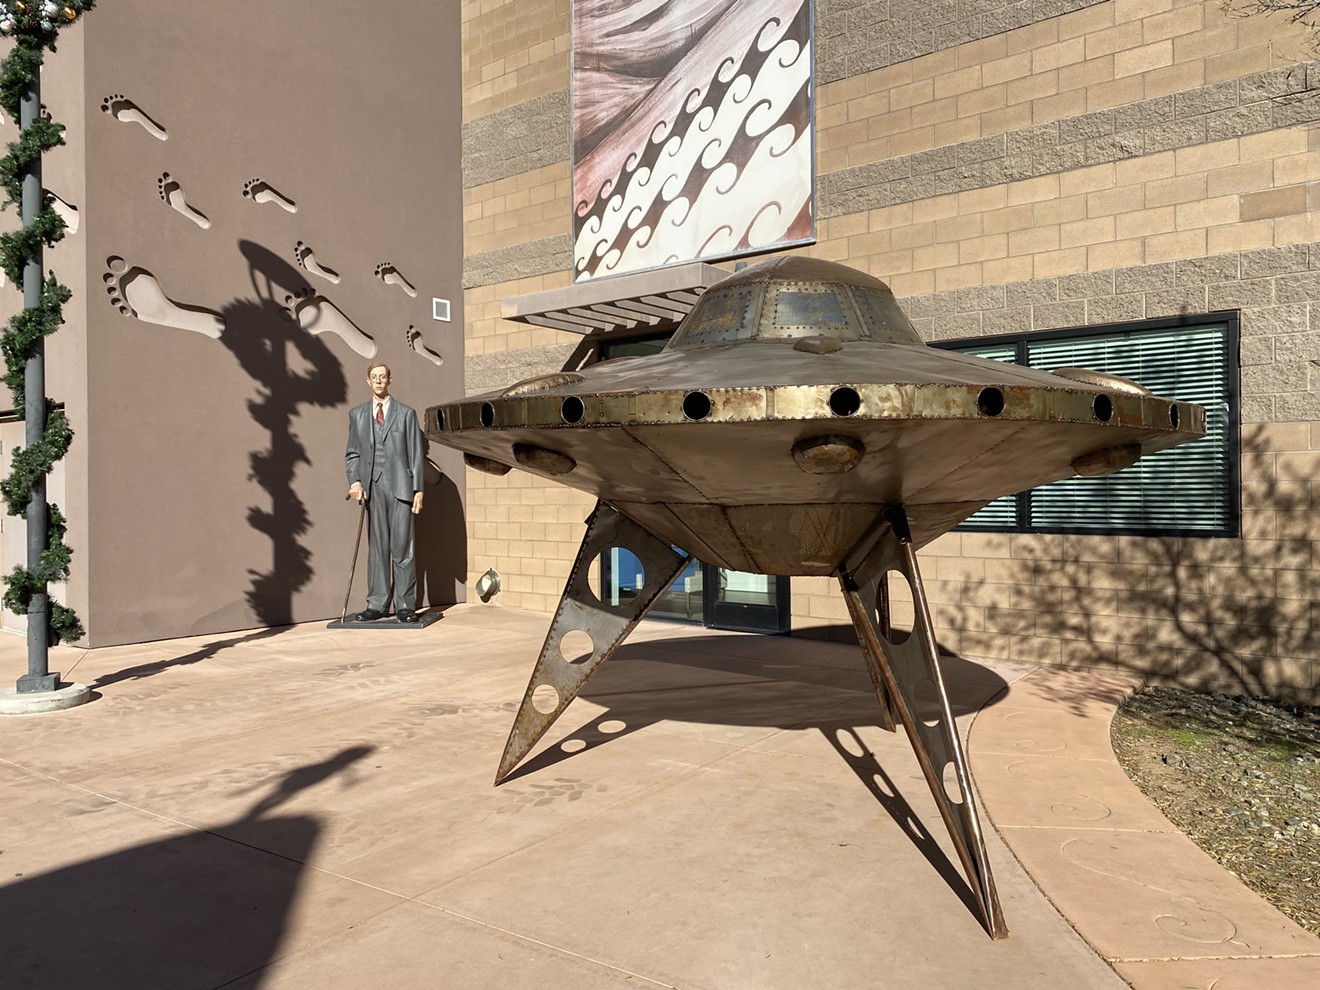 Eighty million Americans believe UFOs are real, and 10 percent have reported seeing one personally. This replica at Arizona Boardwalk is not one of them.